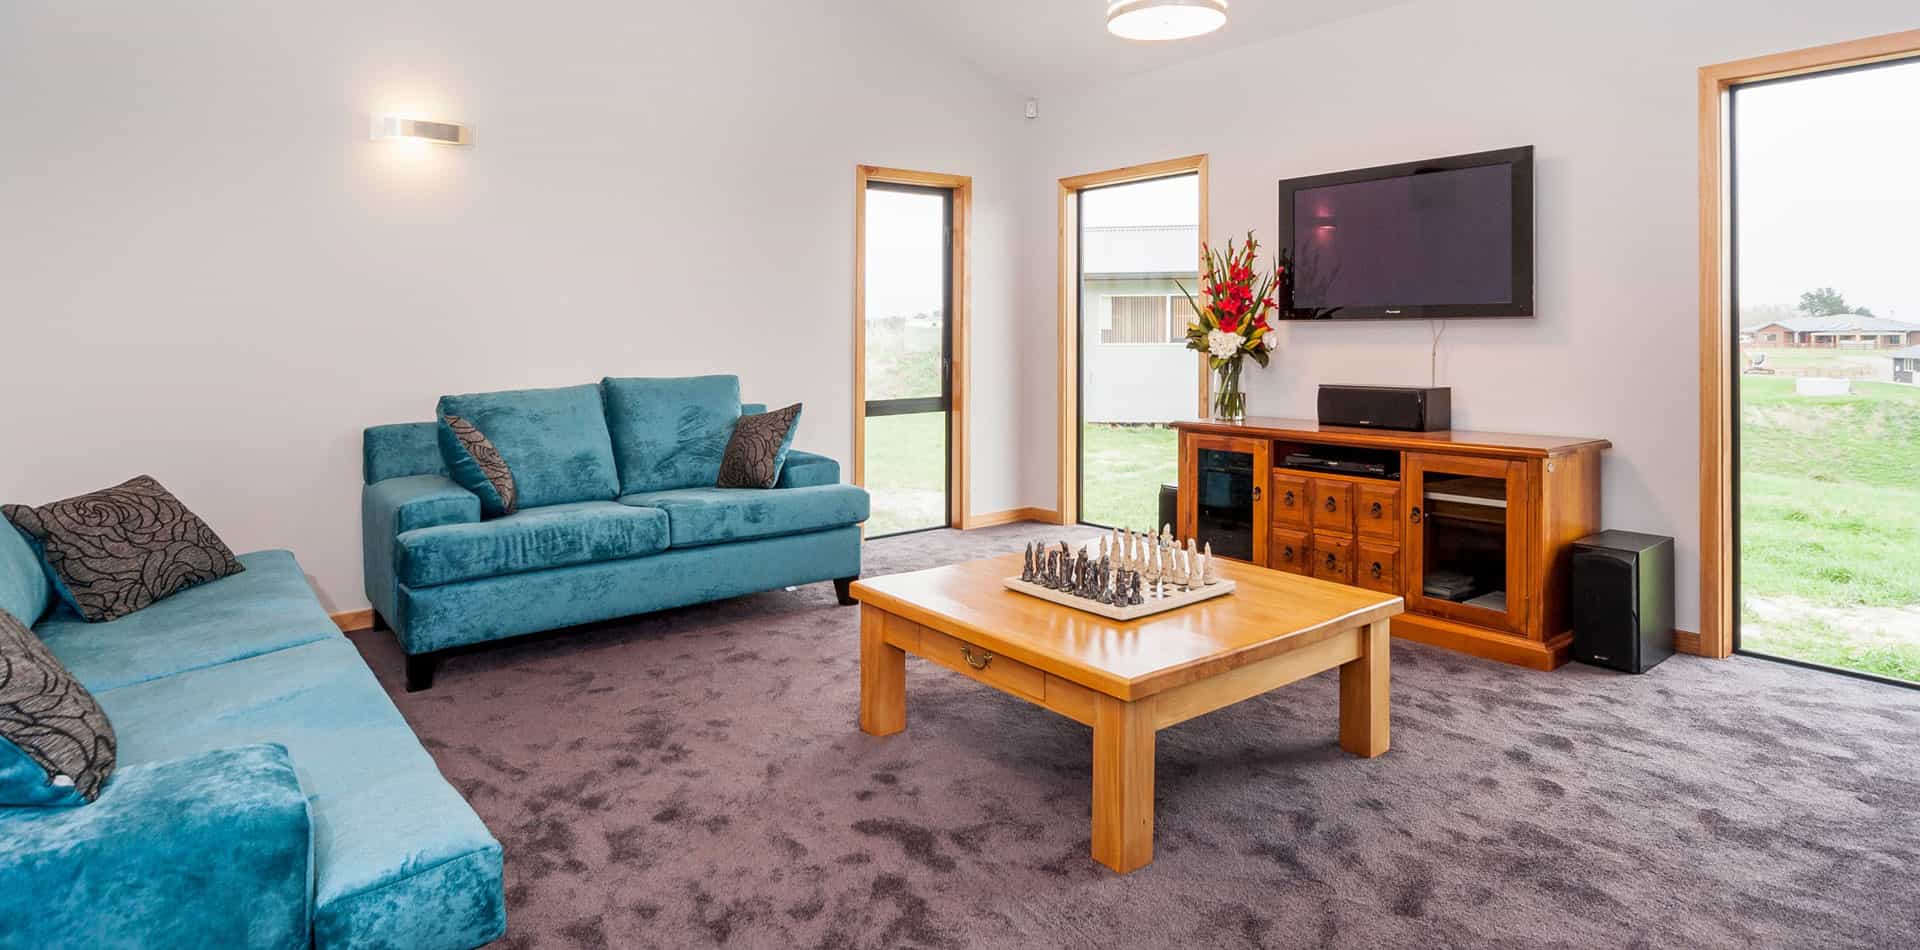 Fowler-Homes-design-and-build-new-zealand-wide-previous-builds-Manawatu-Holdaway-8